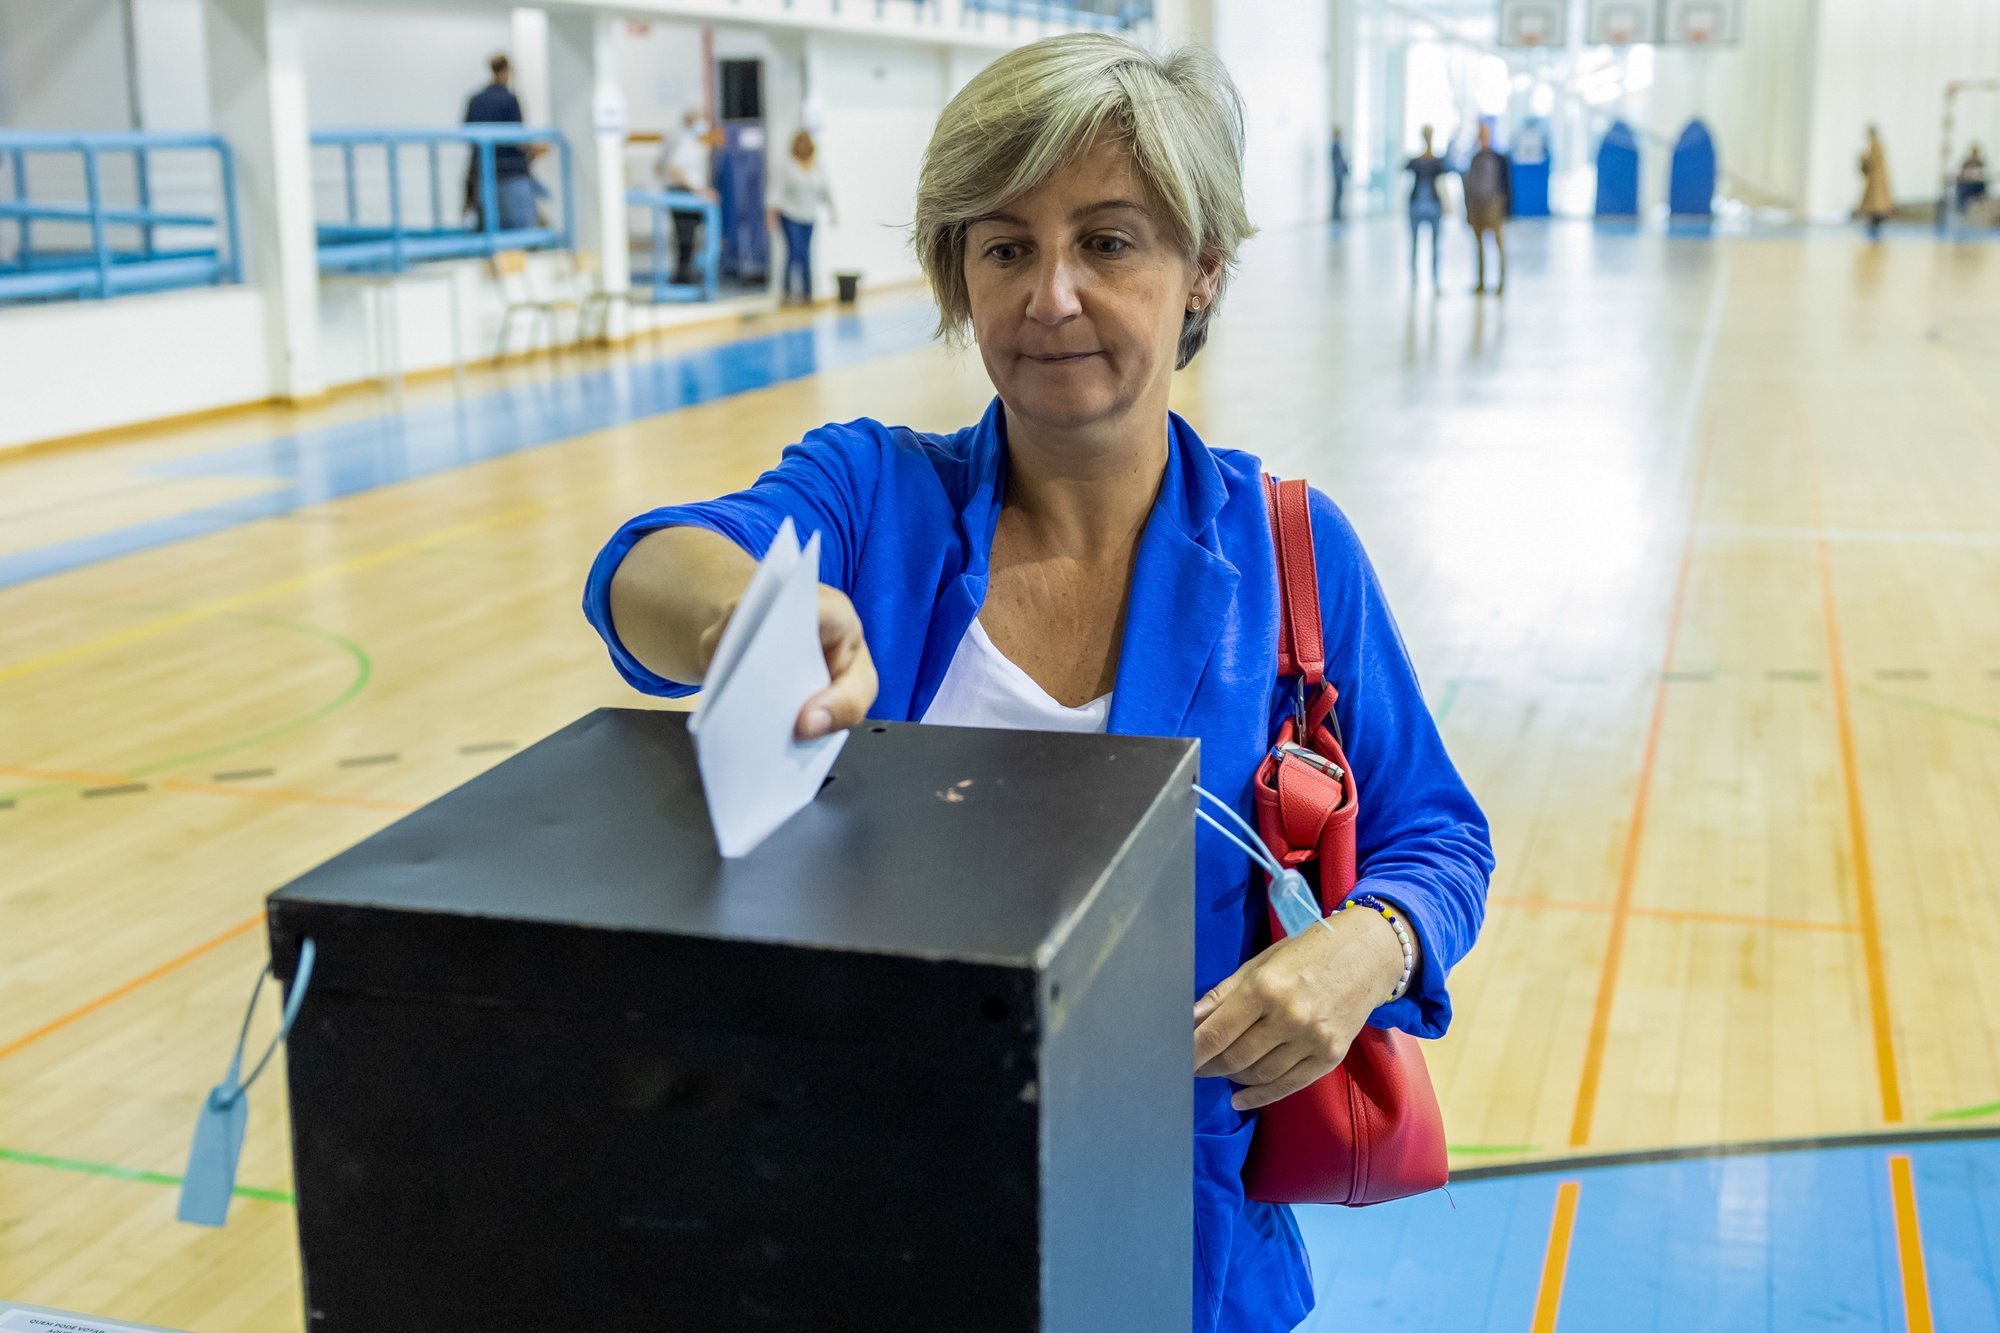 Socialist Party (PS) candidate Marta Temido casts her ballot for the European Elections at a polling station in Lisbon, 09 June 2024. More than 10.8 million registered voters in Portugal and abroad go to the polls today to choose 21 of the 720 members of the European Parliament. JOSE SENA GOULAO/LUSA